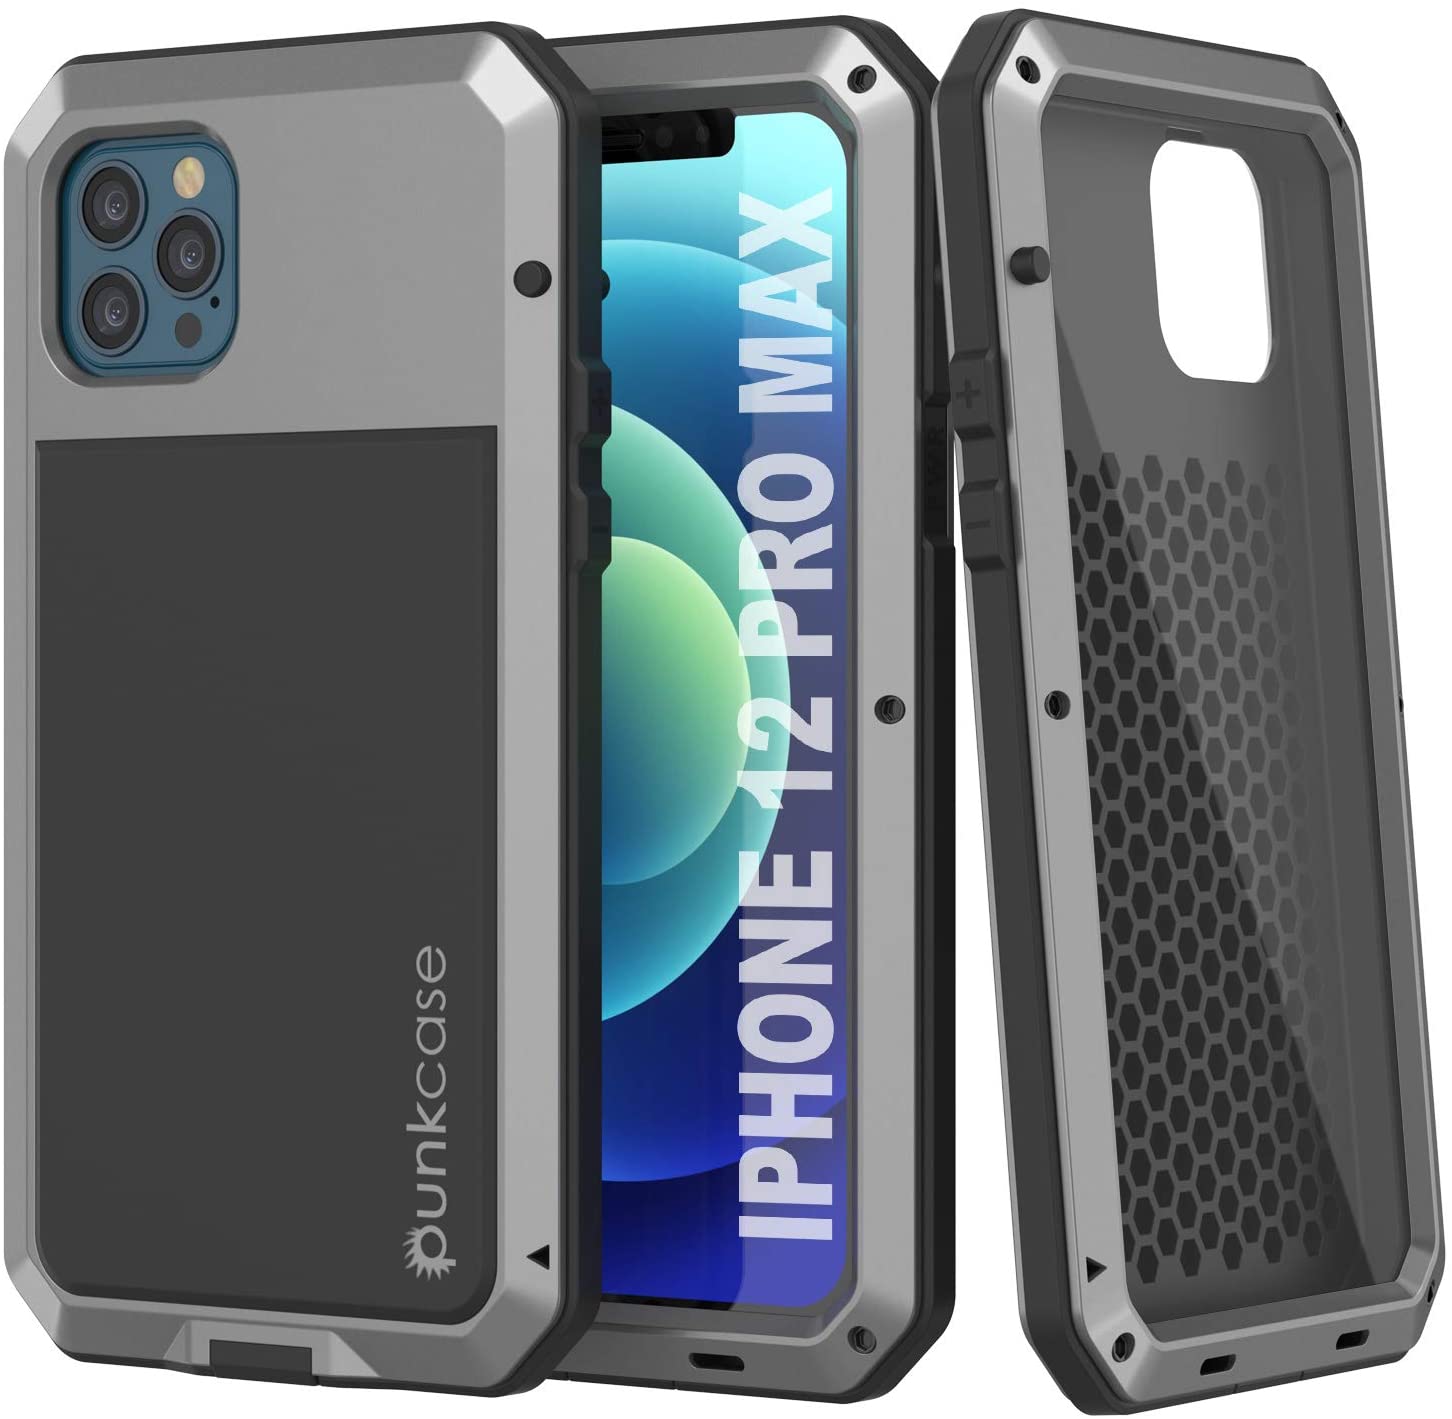  iPhone X Metal Case, Heavy Duty Military Grade Rugged Armor  Cover [Shock Proof] Hybrid Full Body Hard Aluminum & TPU Design [Non Slip]  W/Prime Drop Protection for Apple iPhone 10 [Silver] 